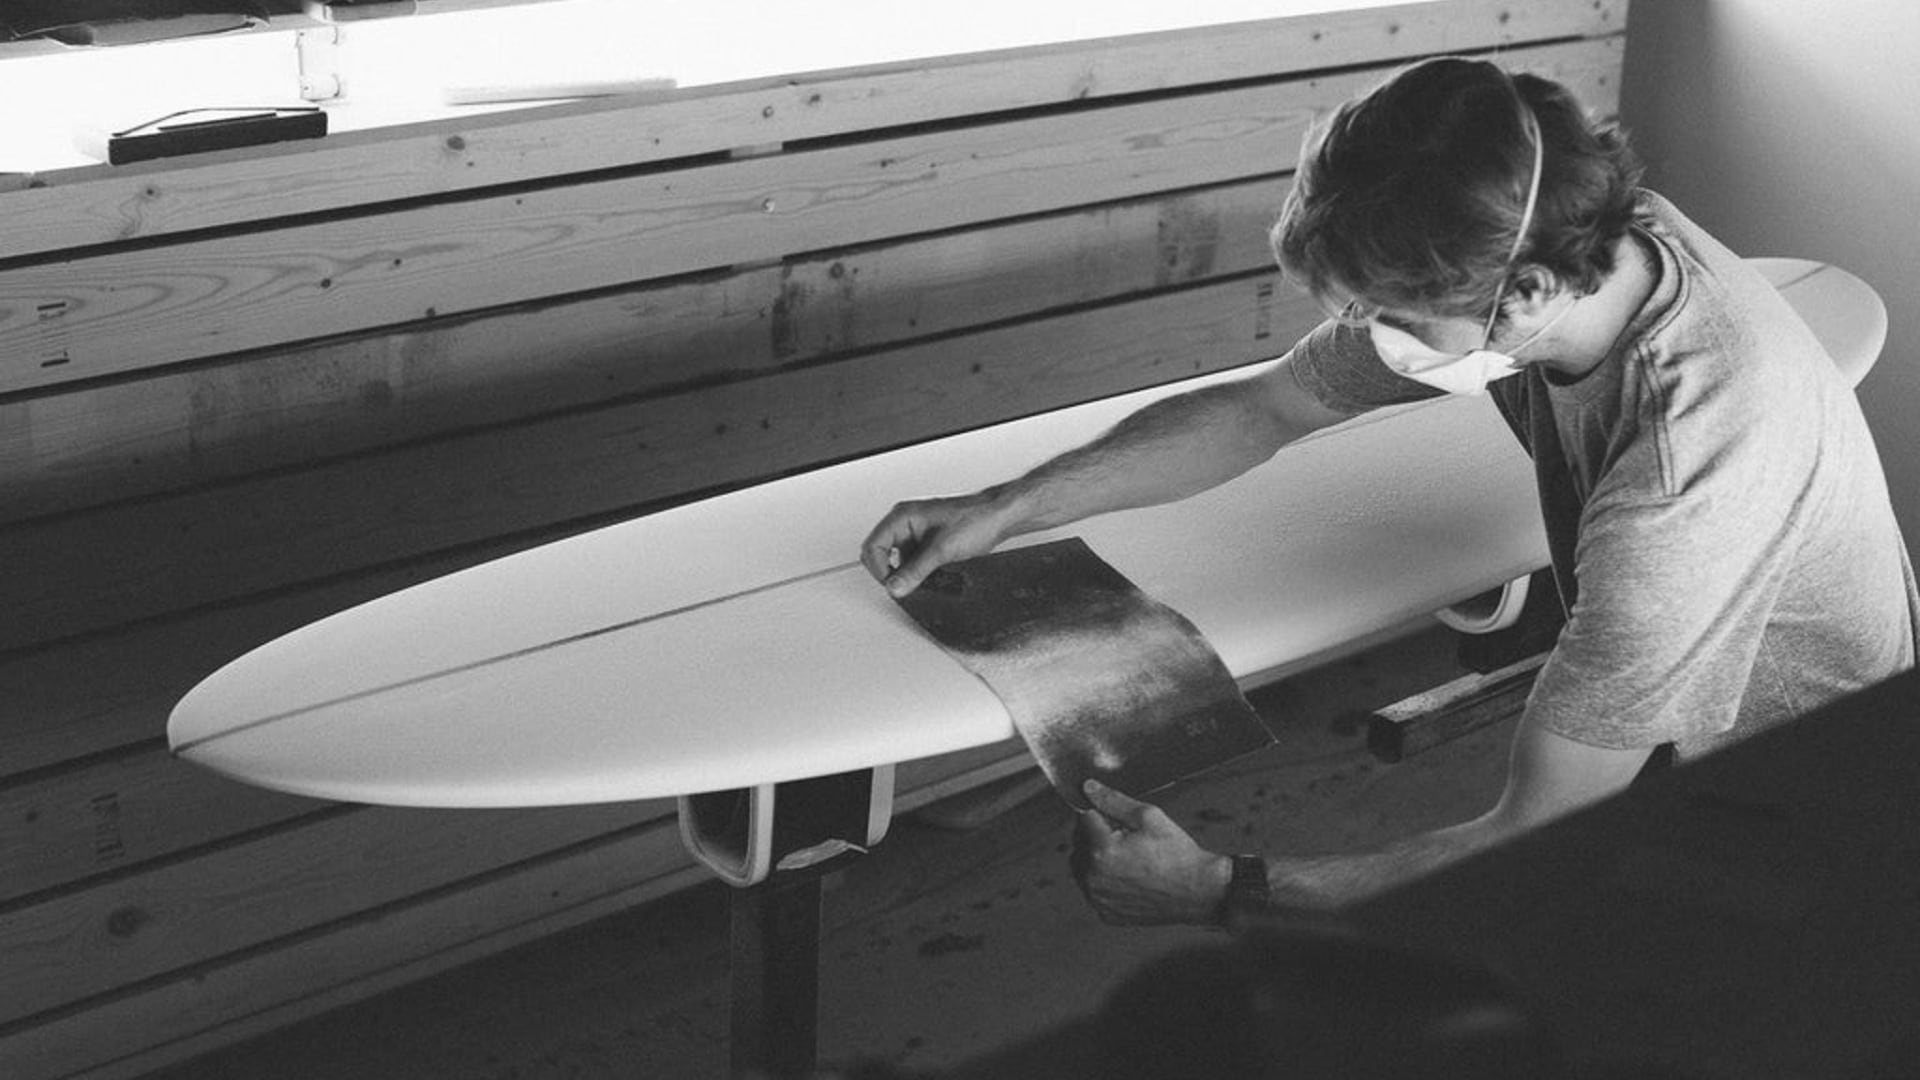 Customized surfboards by the Kima shapers